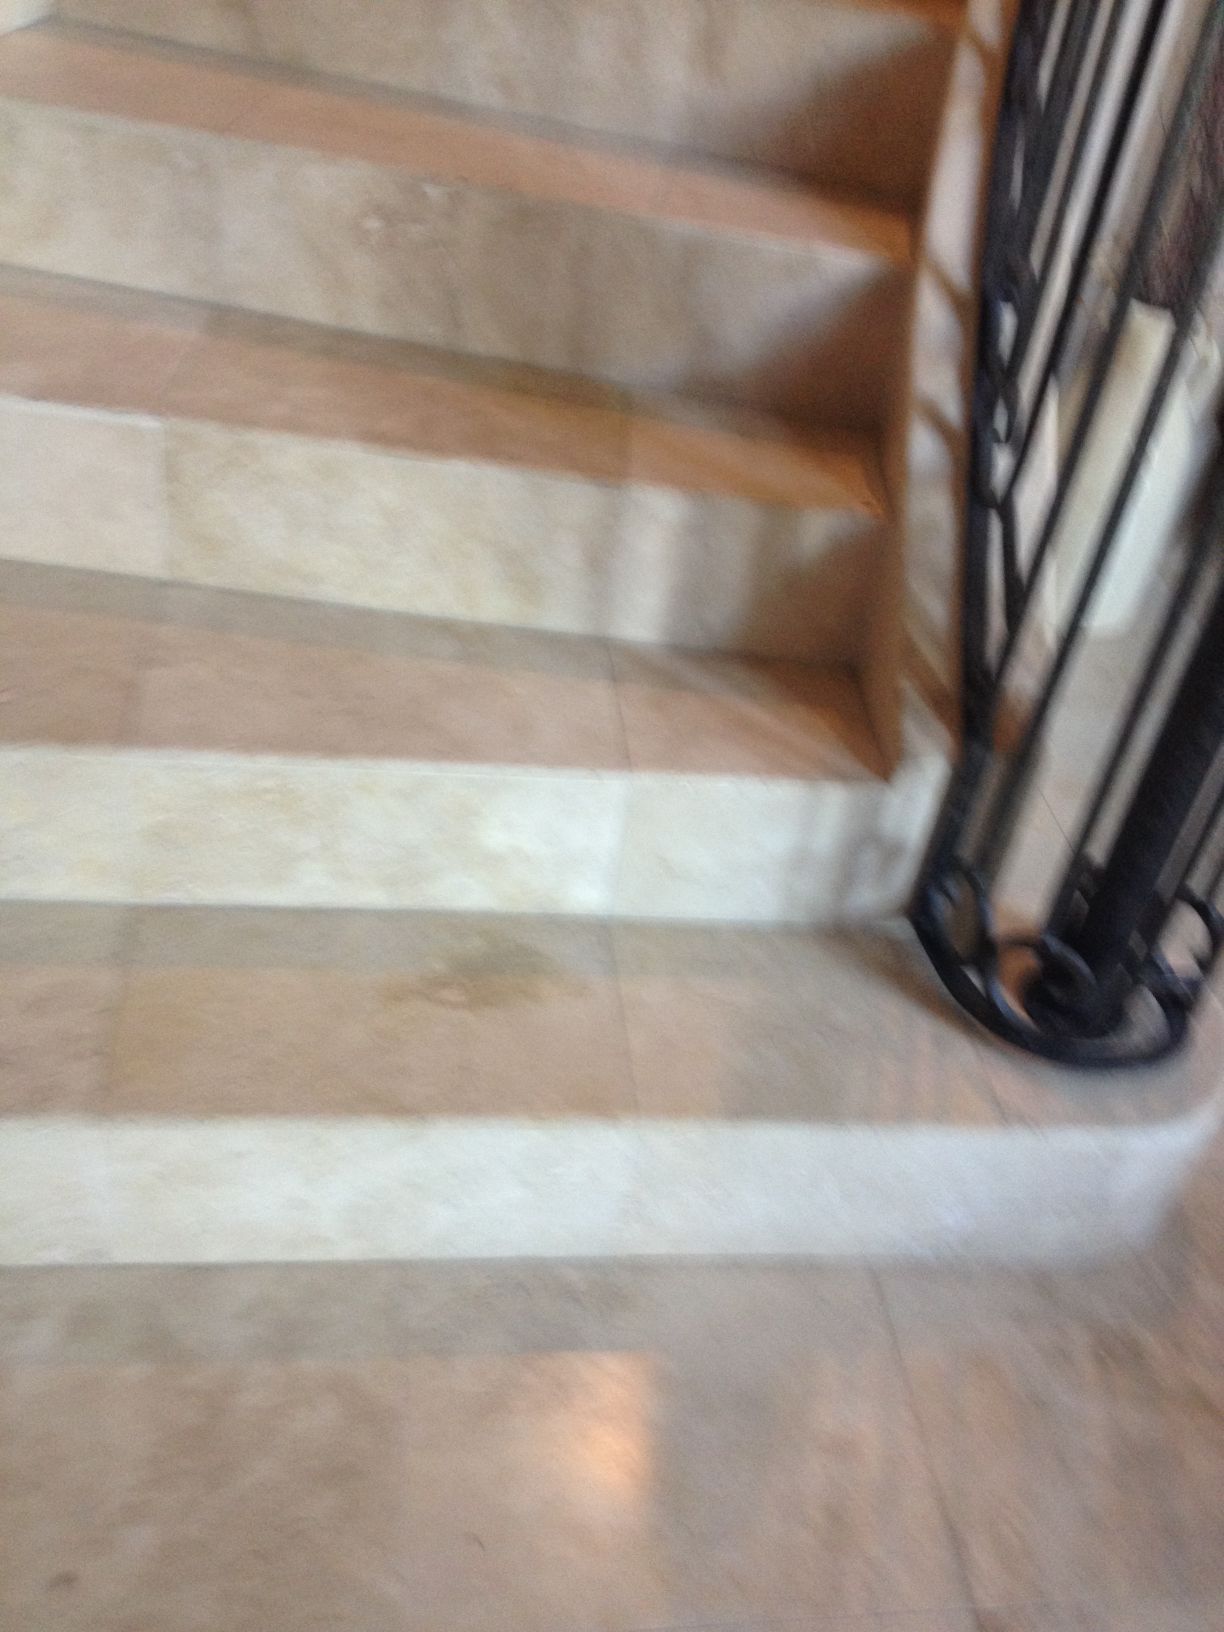 Gallery Images : Positive Cleaning Services, LLC.